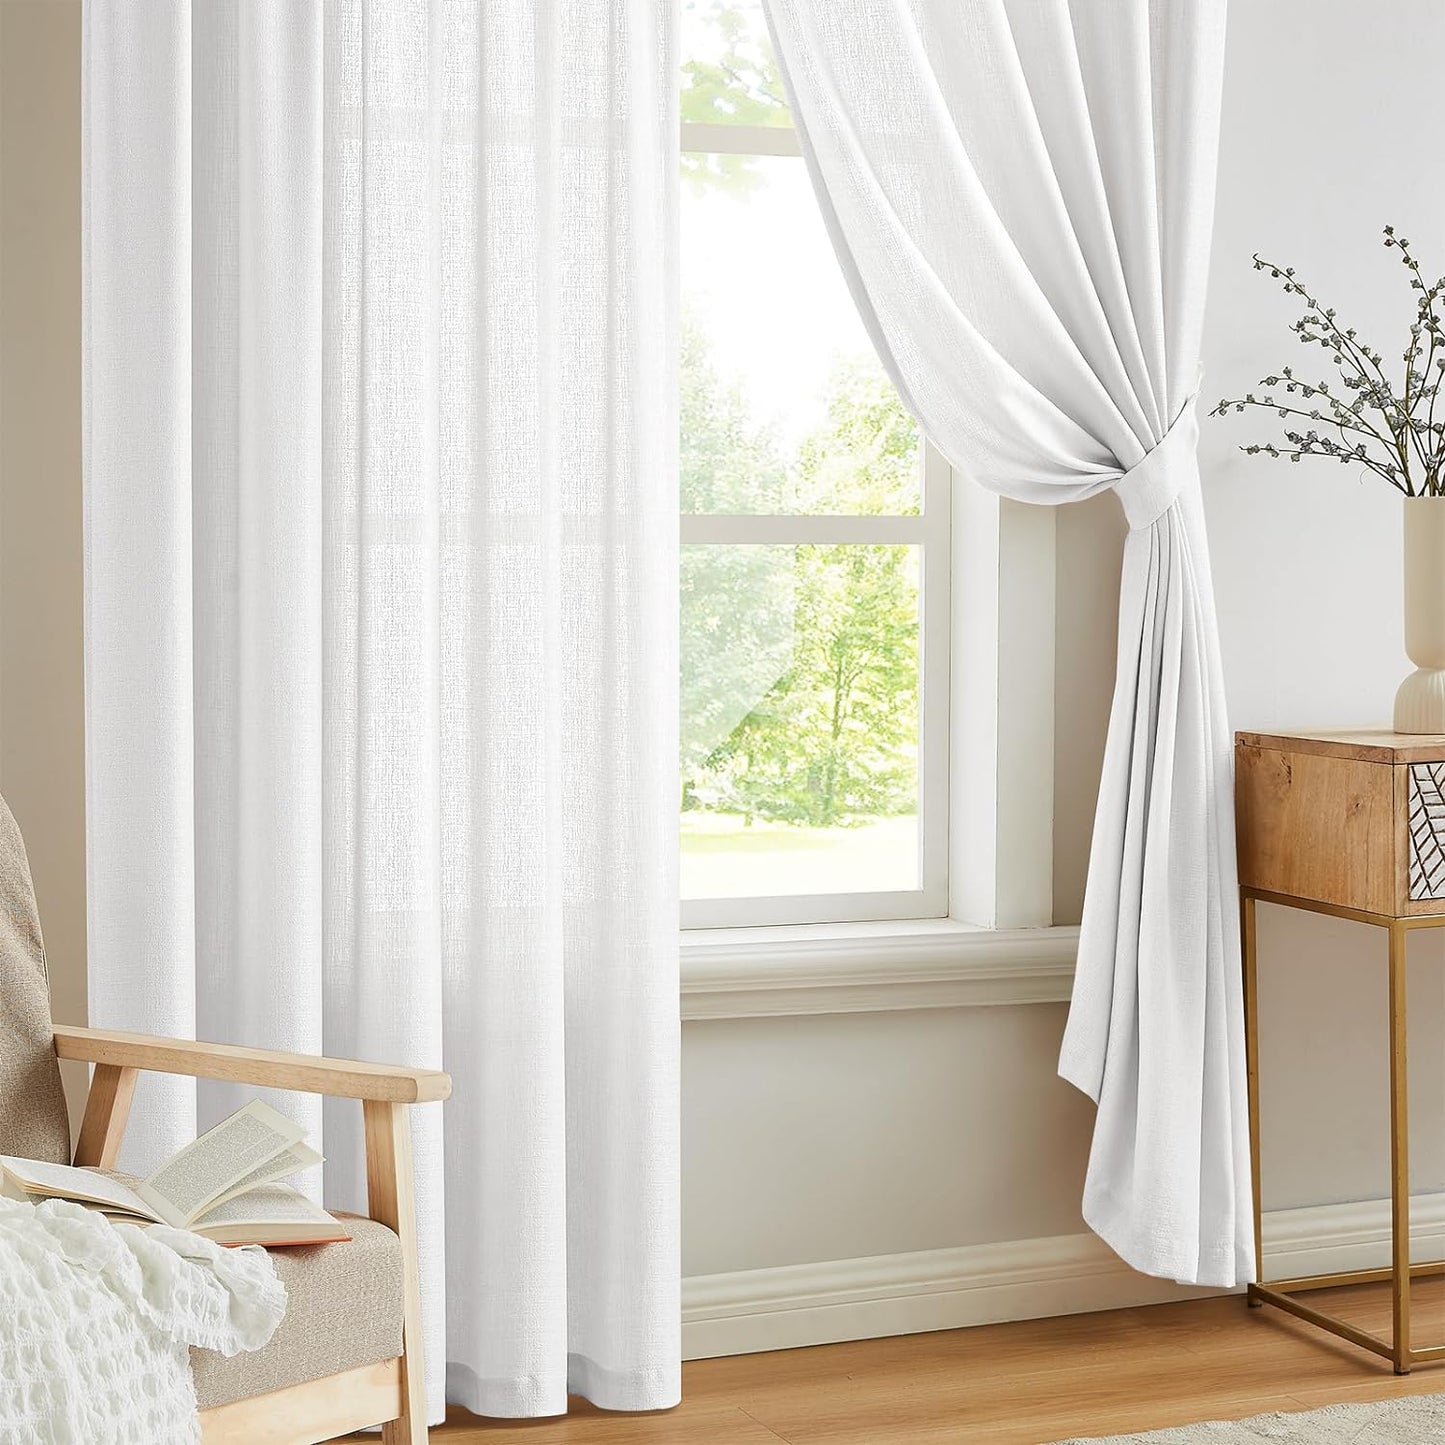 Anpark White Semi Sheer Curtains Linen Rod Pocket Curtains Tiebacks Included Semi Sheers, Privacy & Serenity for Bedroom, Soft Light for Relaxation - 52" W X 84" L, 2 Panels  Anpark   